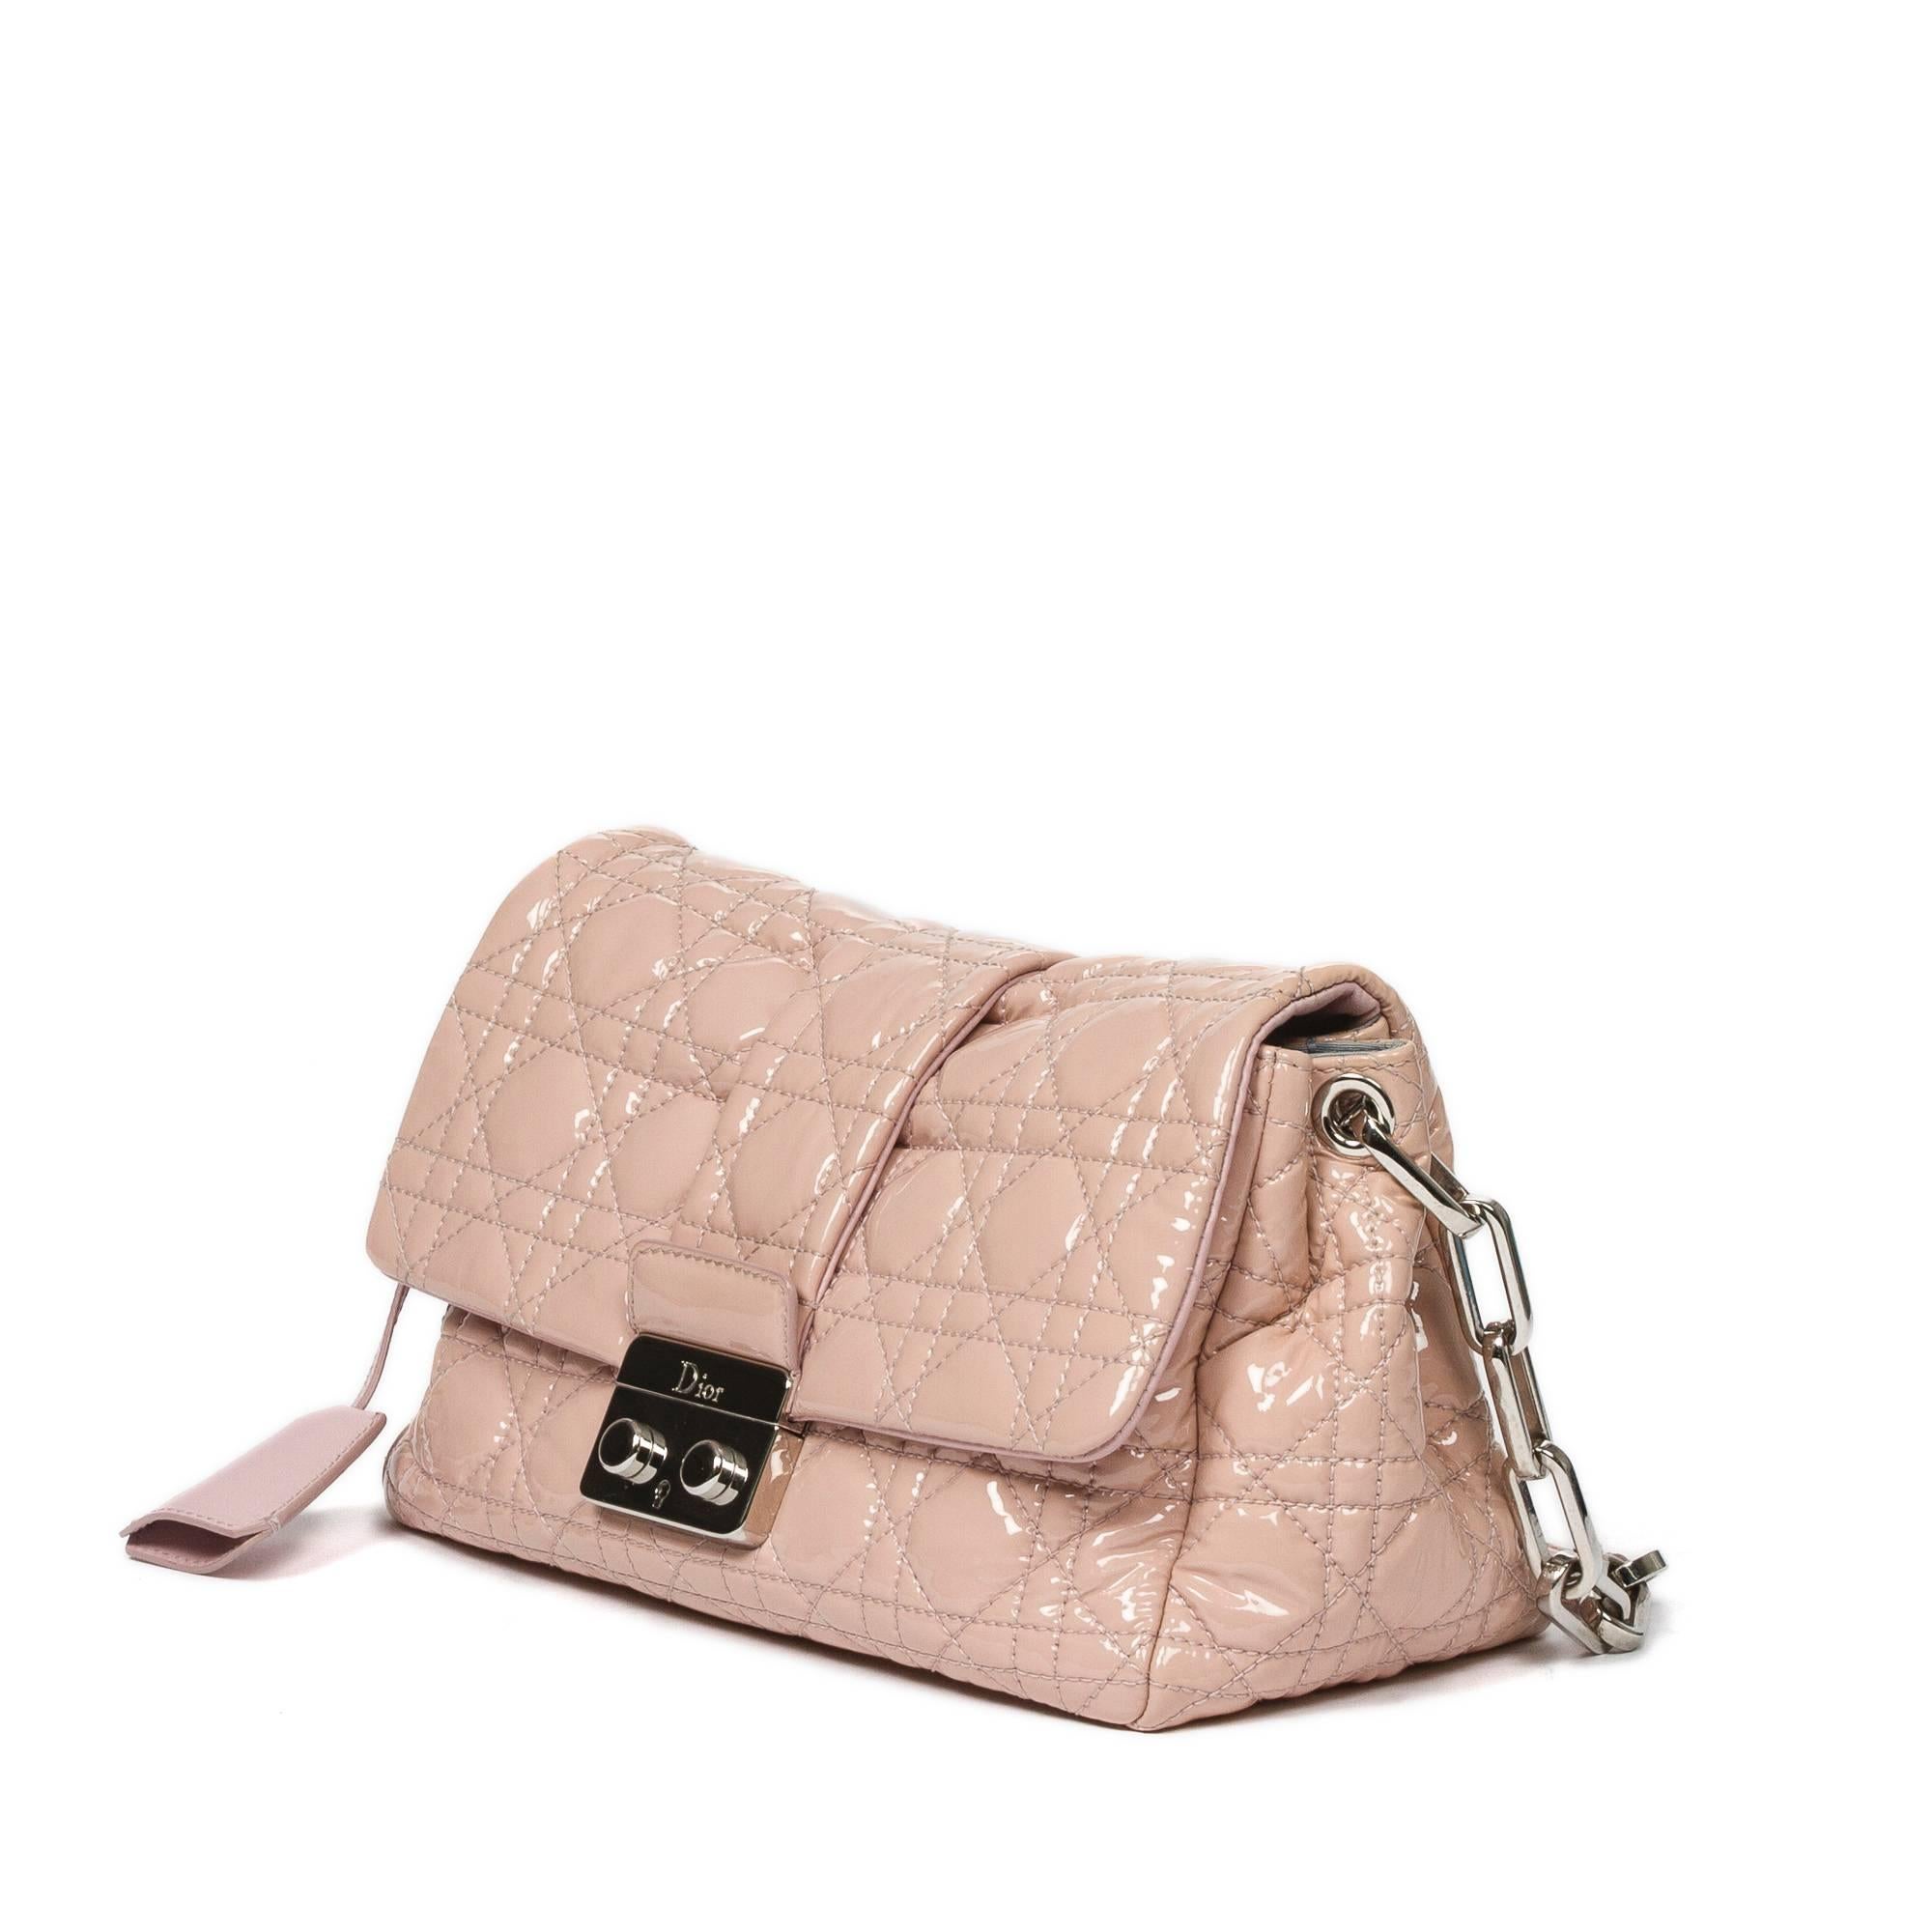 Miss Dior handbag in soft pink cannage patent leather with chain and leather strap, key in clochette, silver tone hardware. 